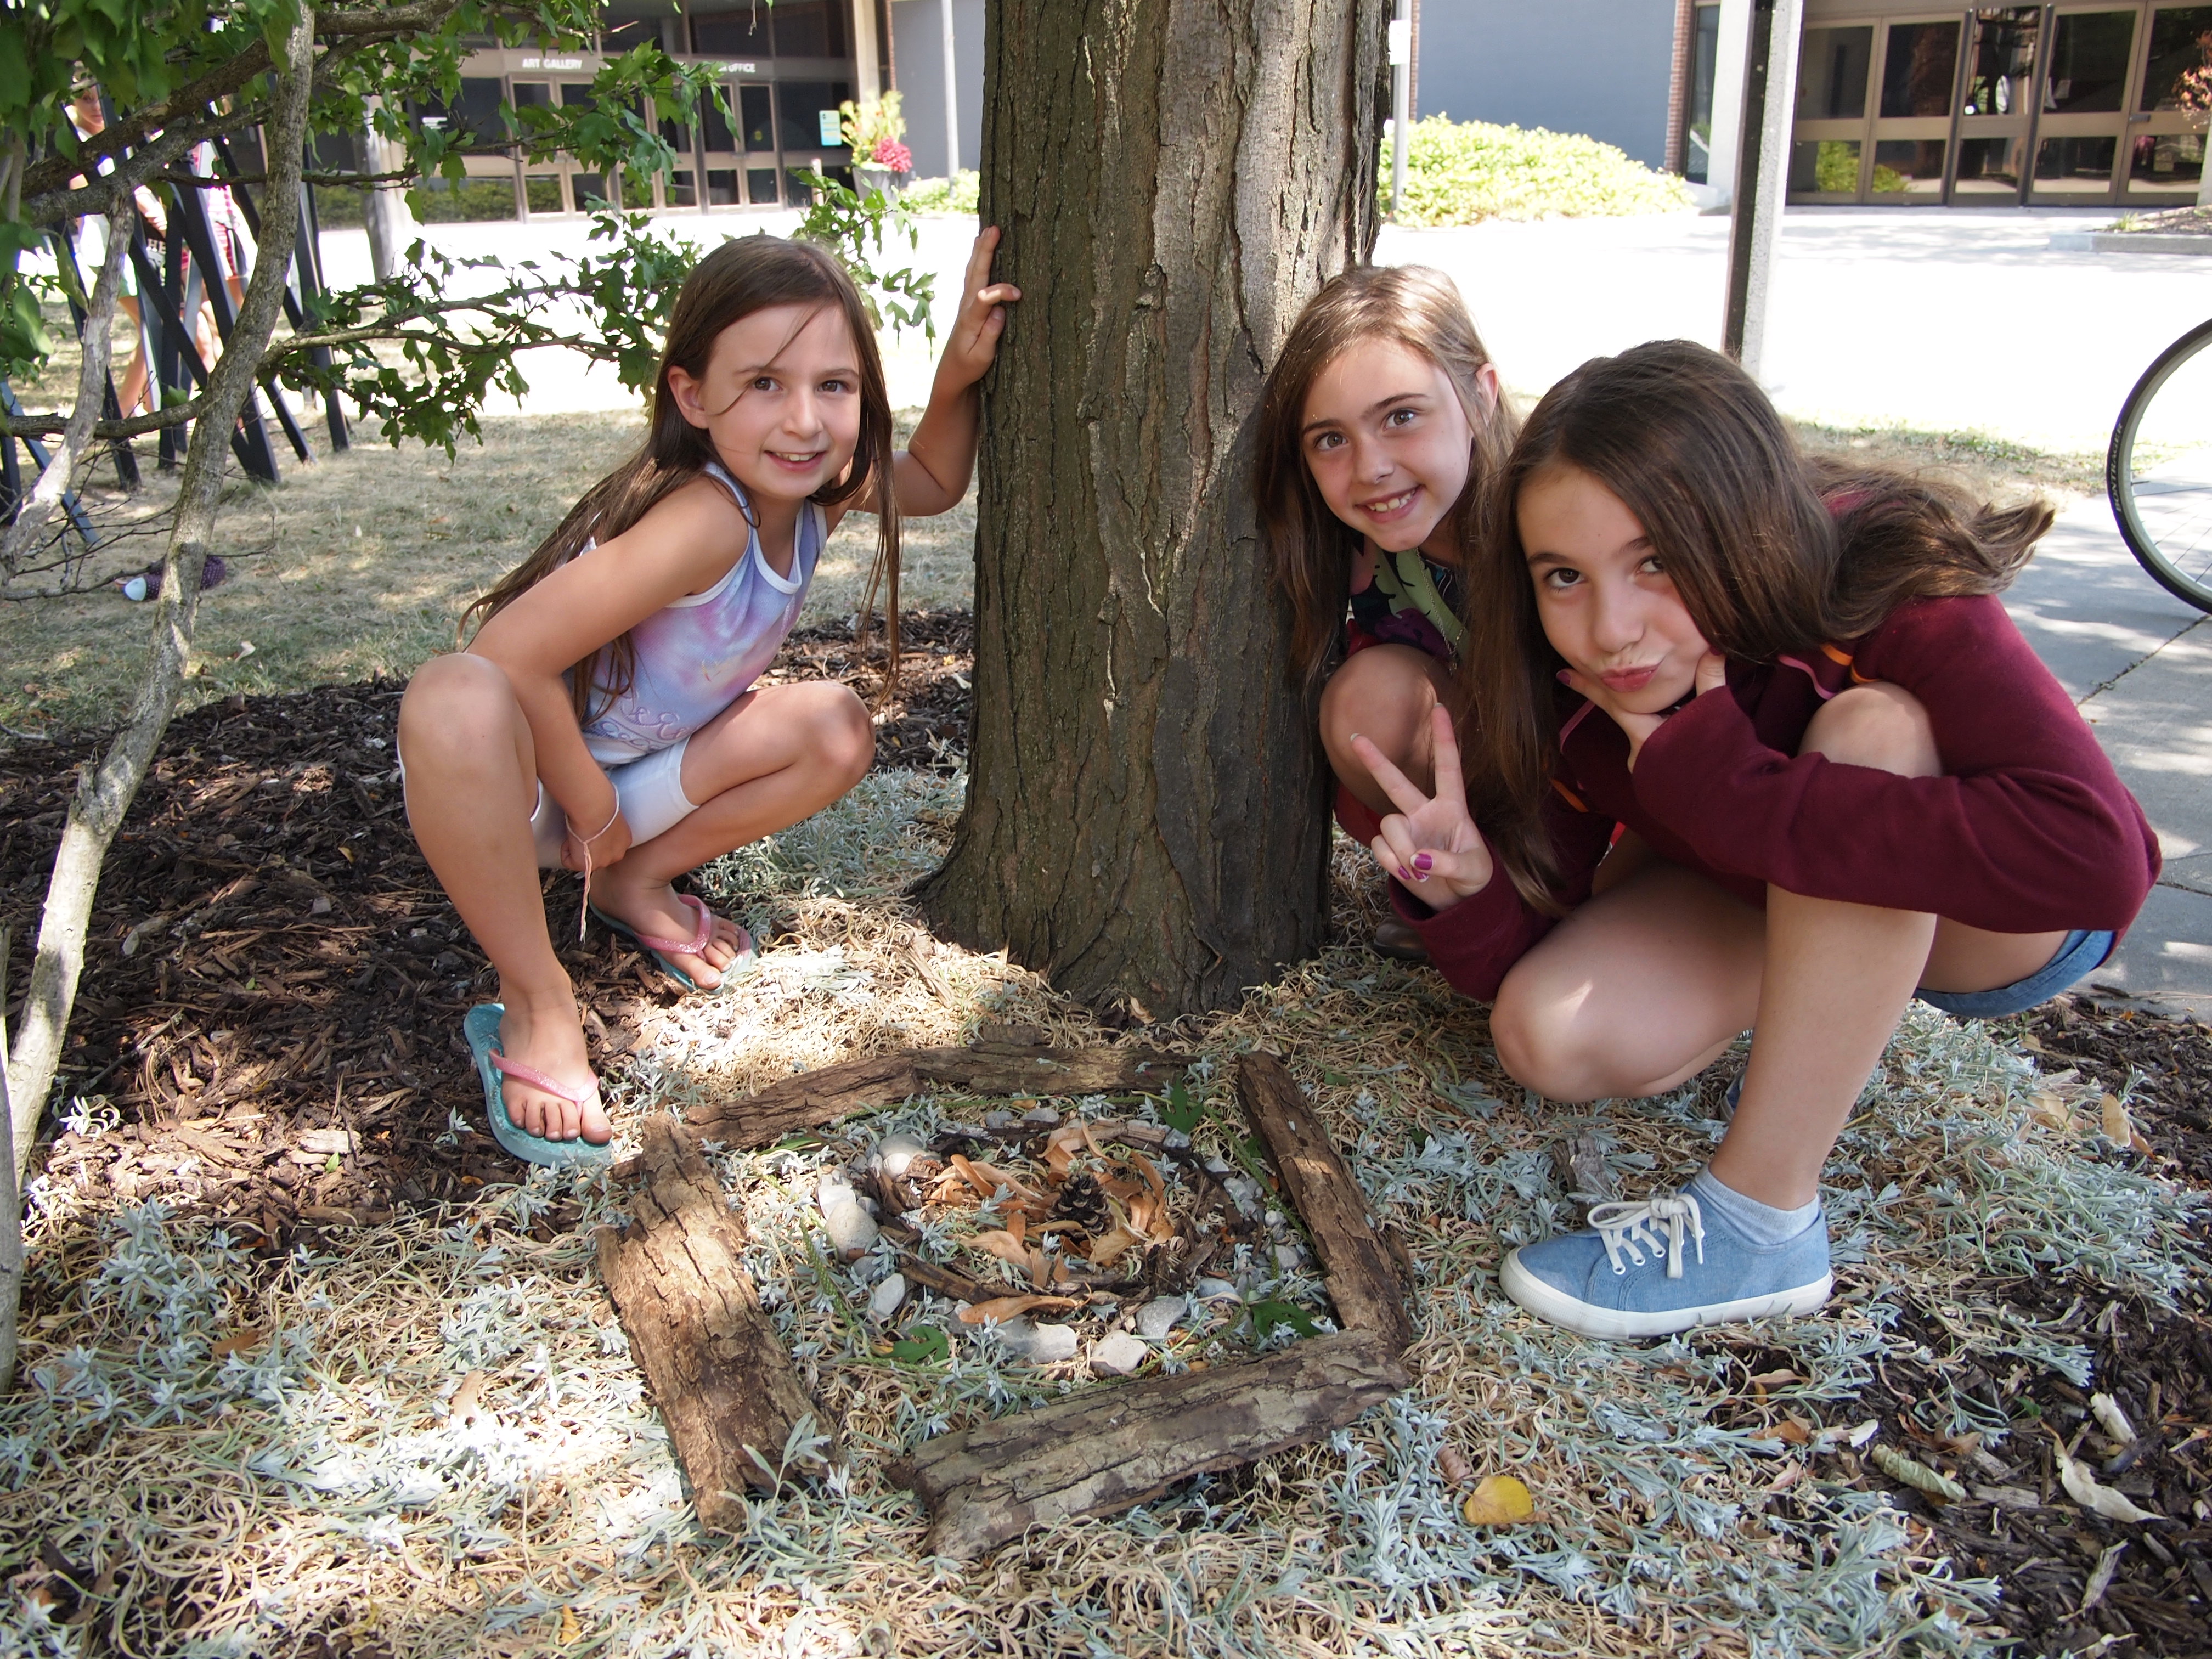 Photo of three young girls crouched around the base of a tree smiling at the camera with an artful arrangement of natural materials displayed between them on the ground